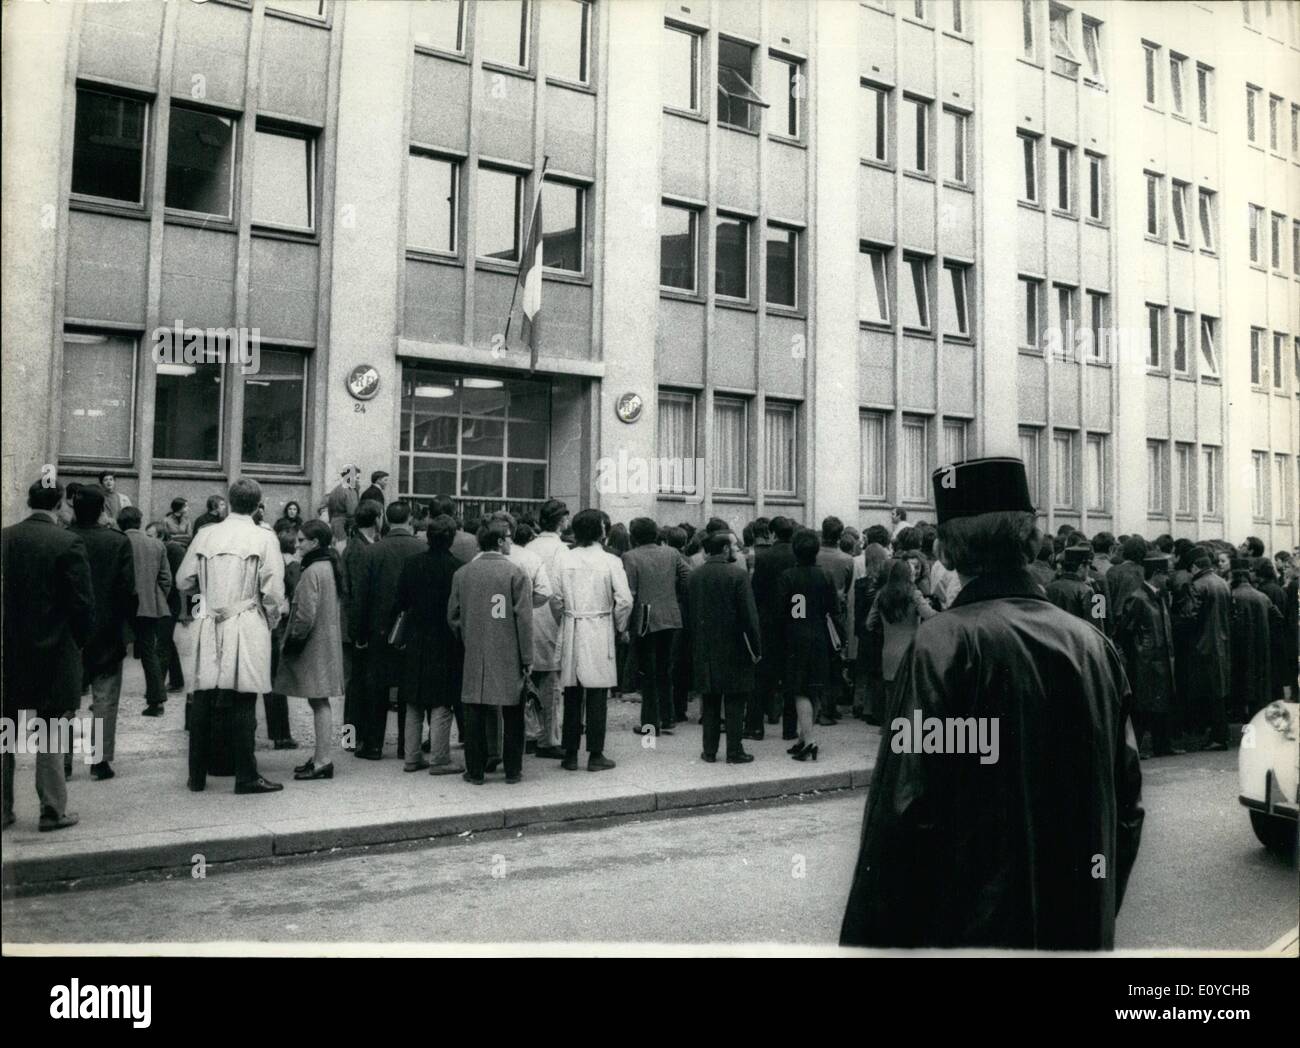 Nov. 11, 1969 - Medics Threaten To Occupy School: First And Second Year Students Of The Paris Medical School Threatened To Occupy The School Premises As A Protest Against The New Regulations Barring Them From Hospital Practice. Photo shows Medical Students Pictured Before The School Closed And Guarded By Police. Stock Photo